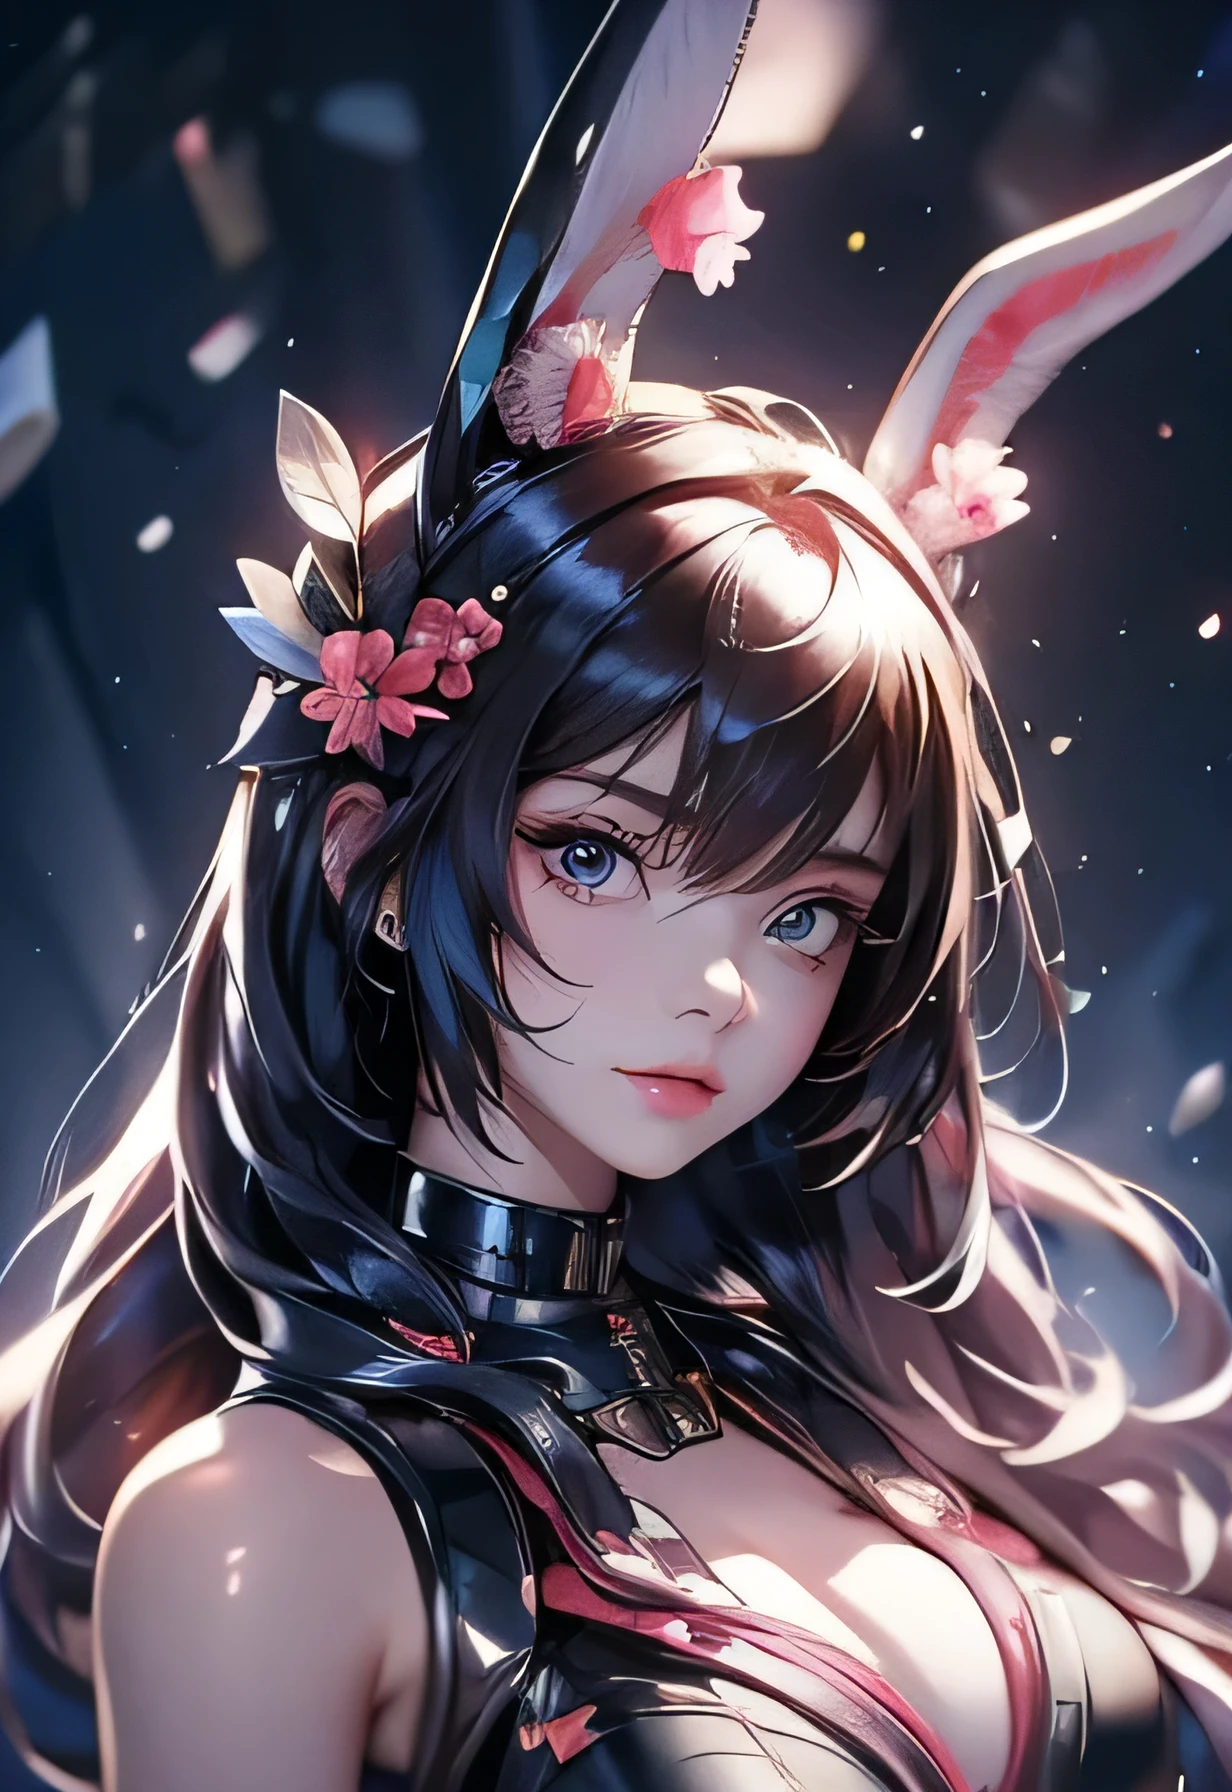 anime style, Cartoon close-up of a woman with ears and bunny tail, With a rabbit tail, With rabbit ears, girls design, Second-rate, portrait, gisha, anime image, long hair, black hair, hair covering ears, Sticking out tongue, open mouth, Polished and powerful look, exotic, High  